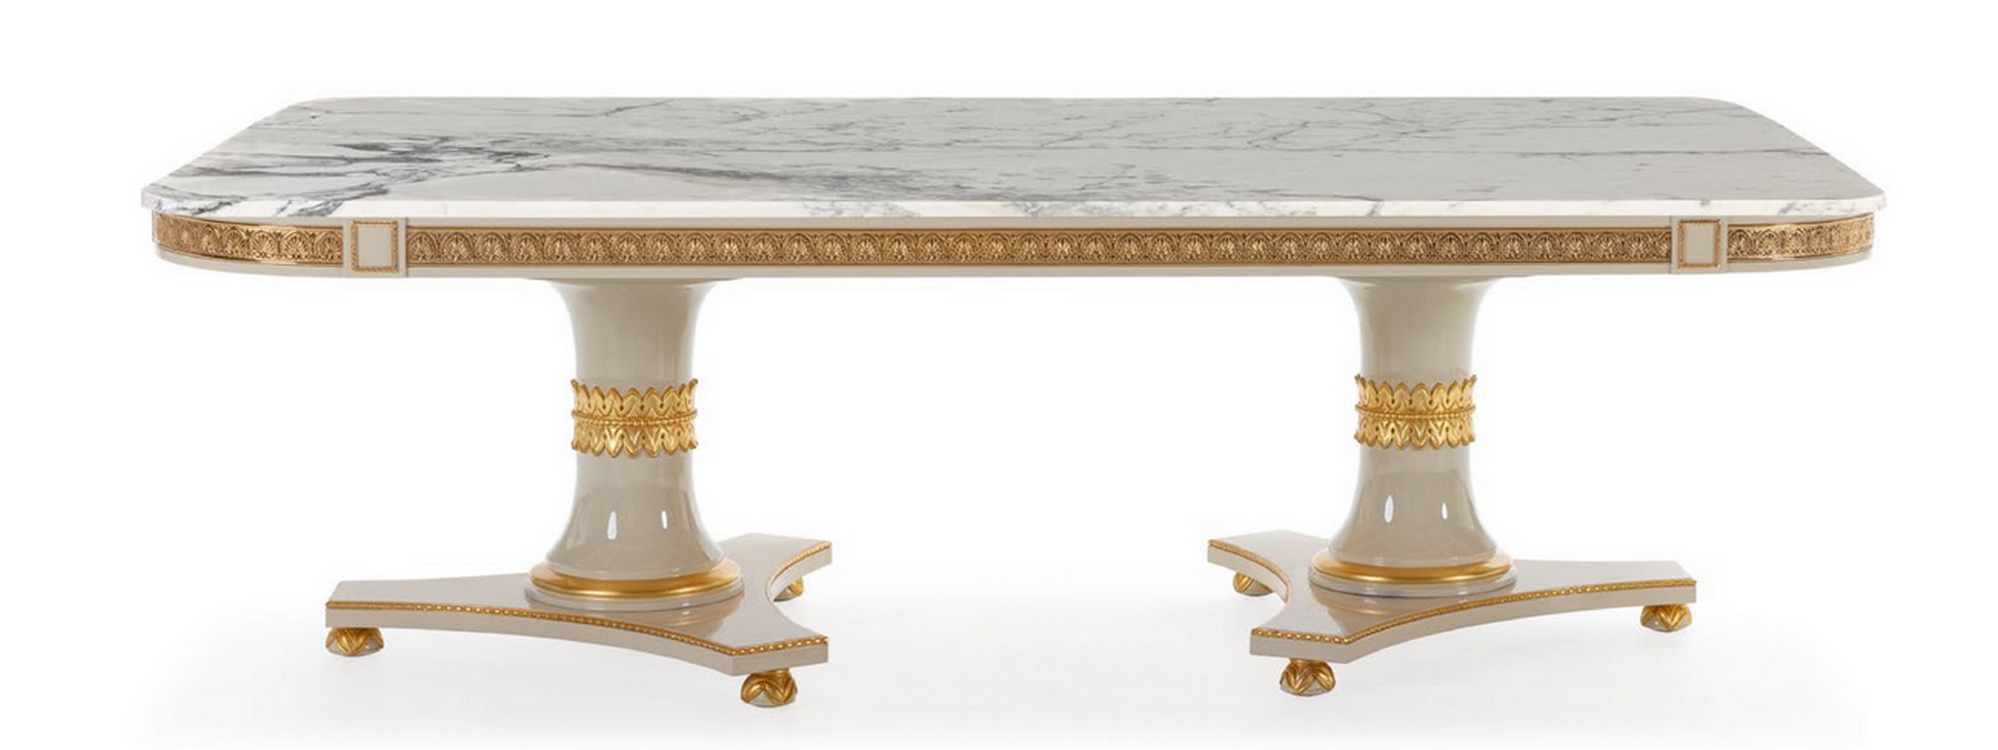 Ref Luxury baroque dining table